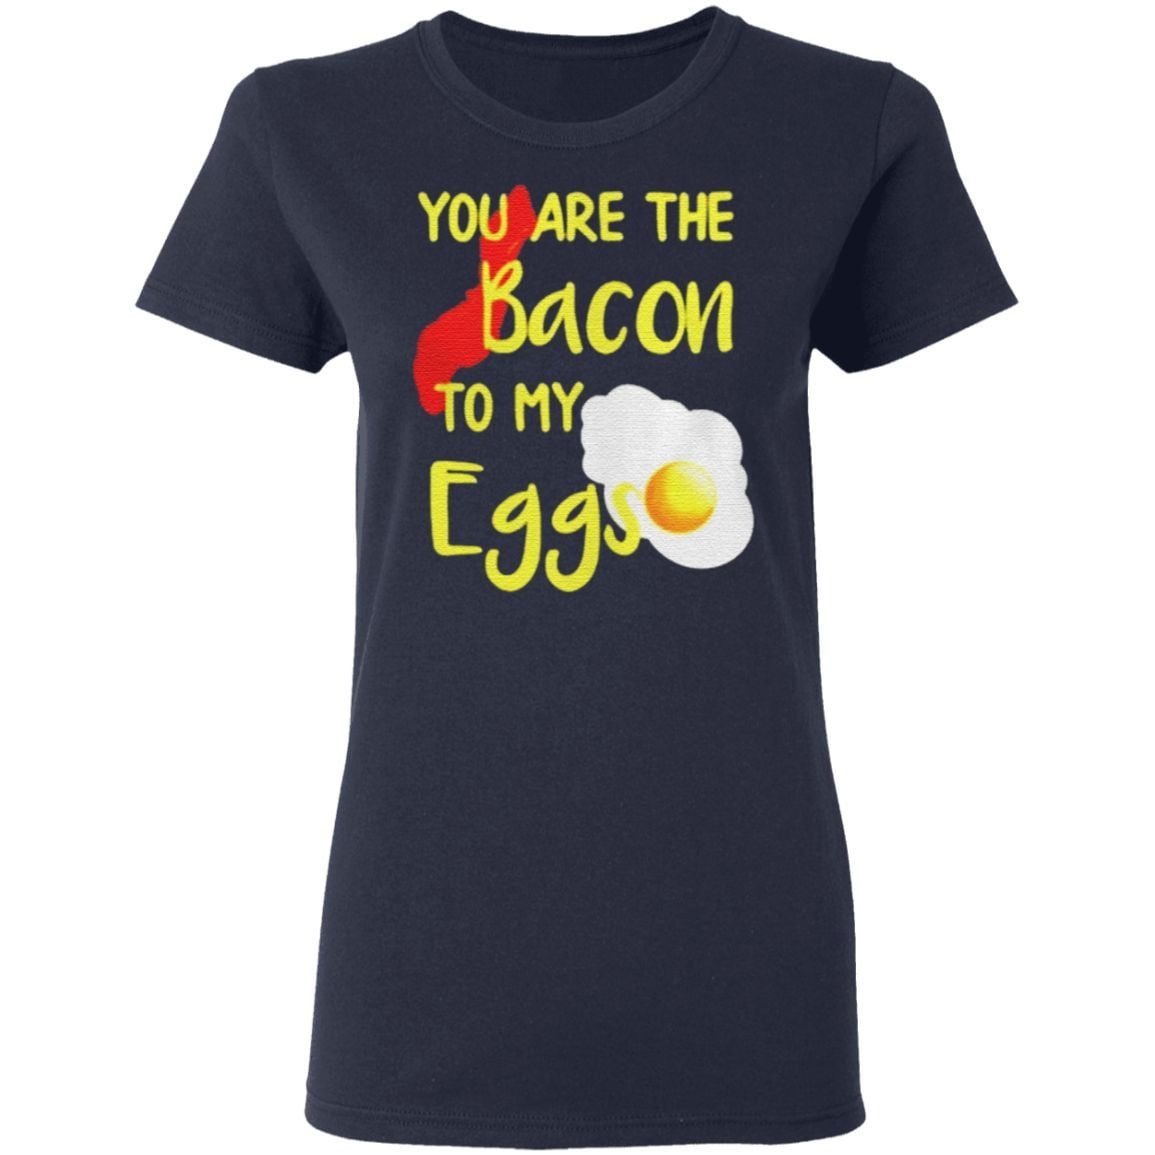 You are the bacon to my eggs t shirt